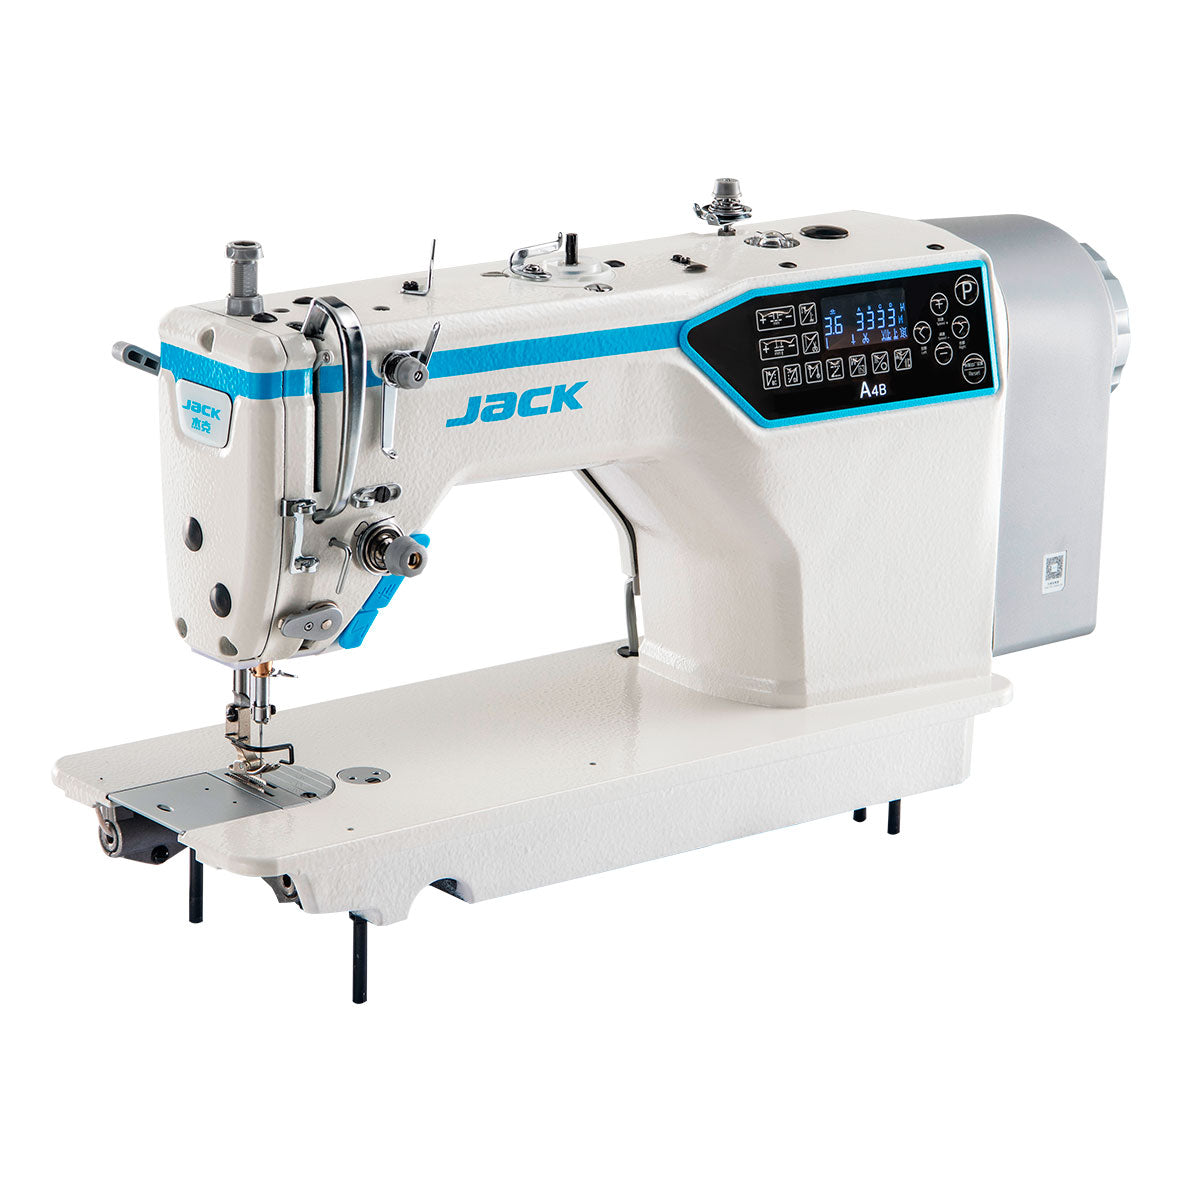 JACK A4BC Single Needle Direct Drive Fully Automatic Drop Feed Lockstitch Industrial Sewing Assembled with Table and Stand Included